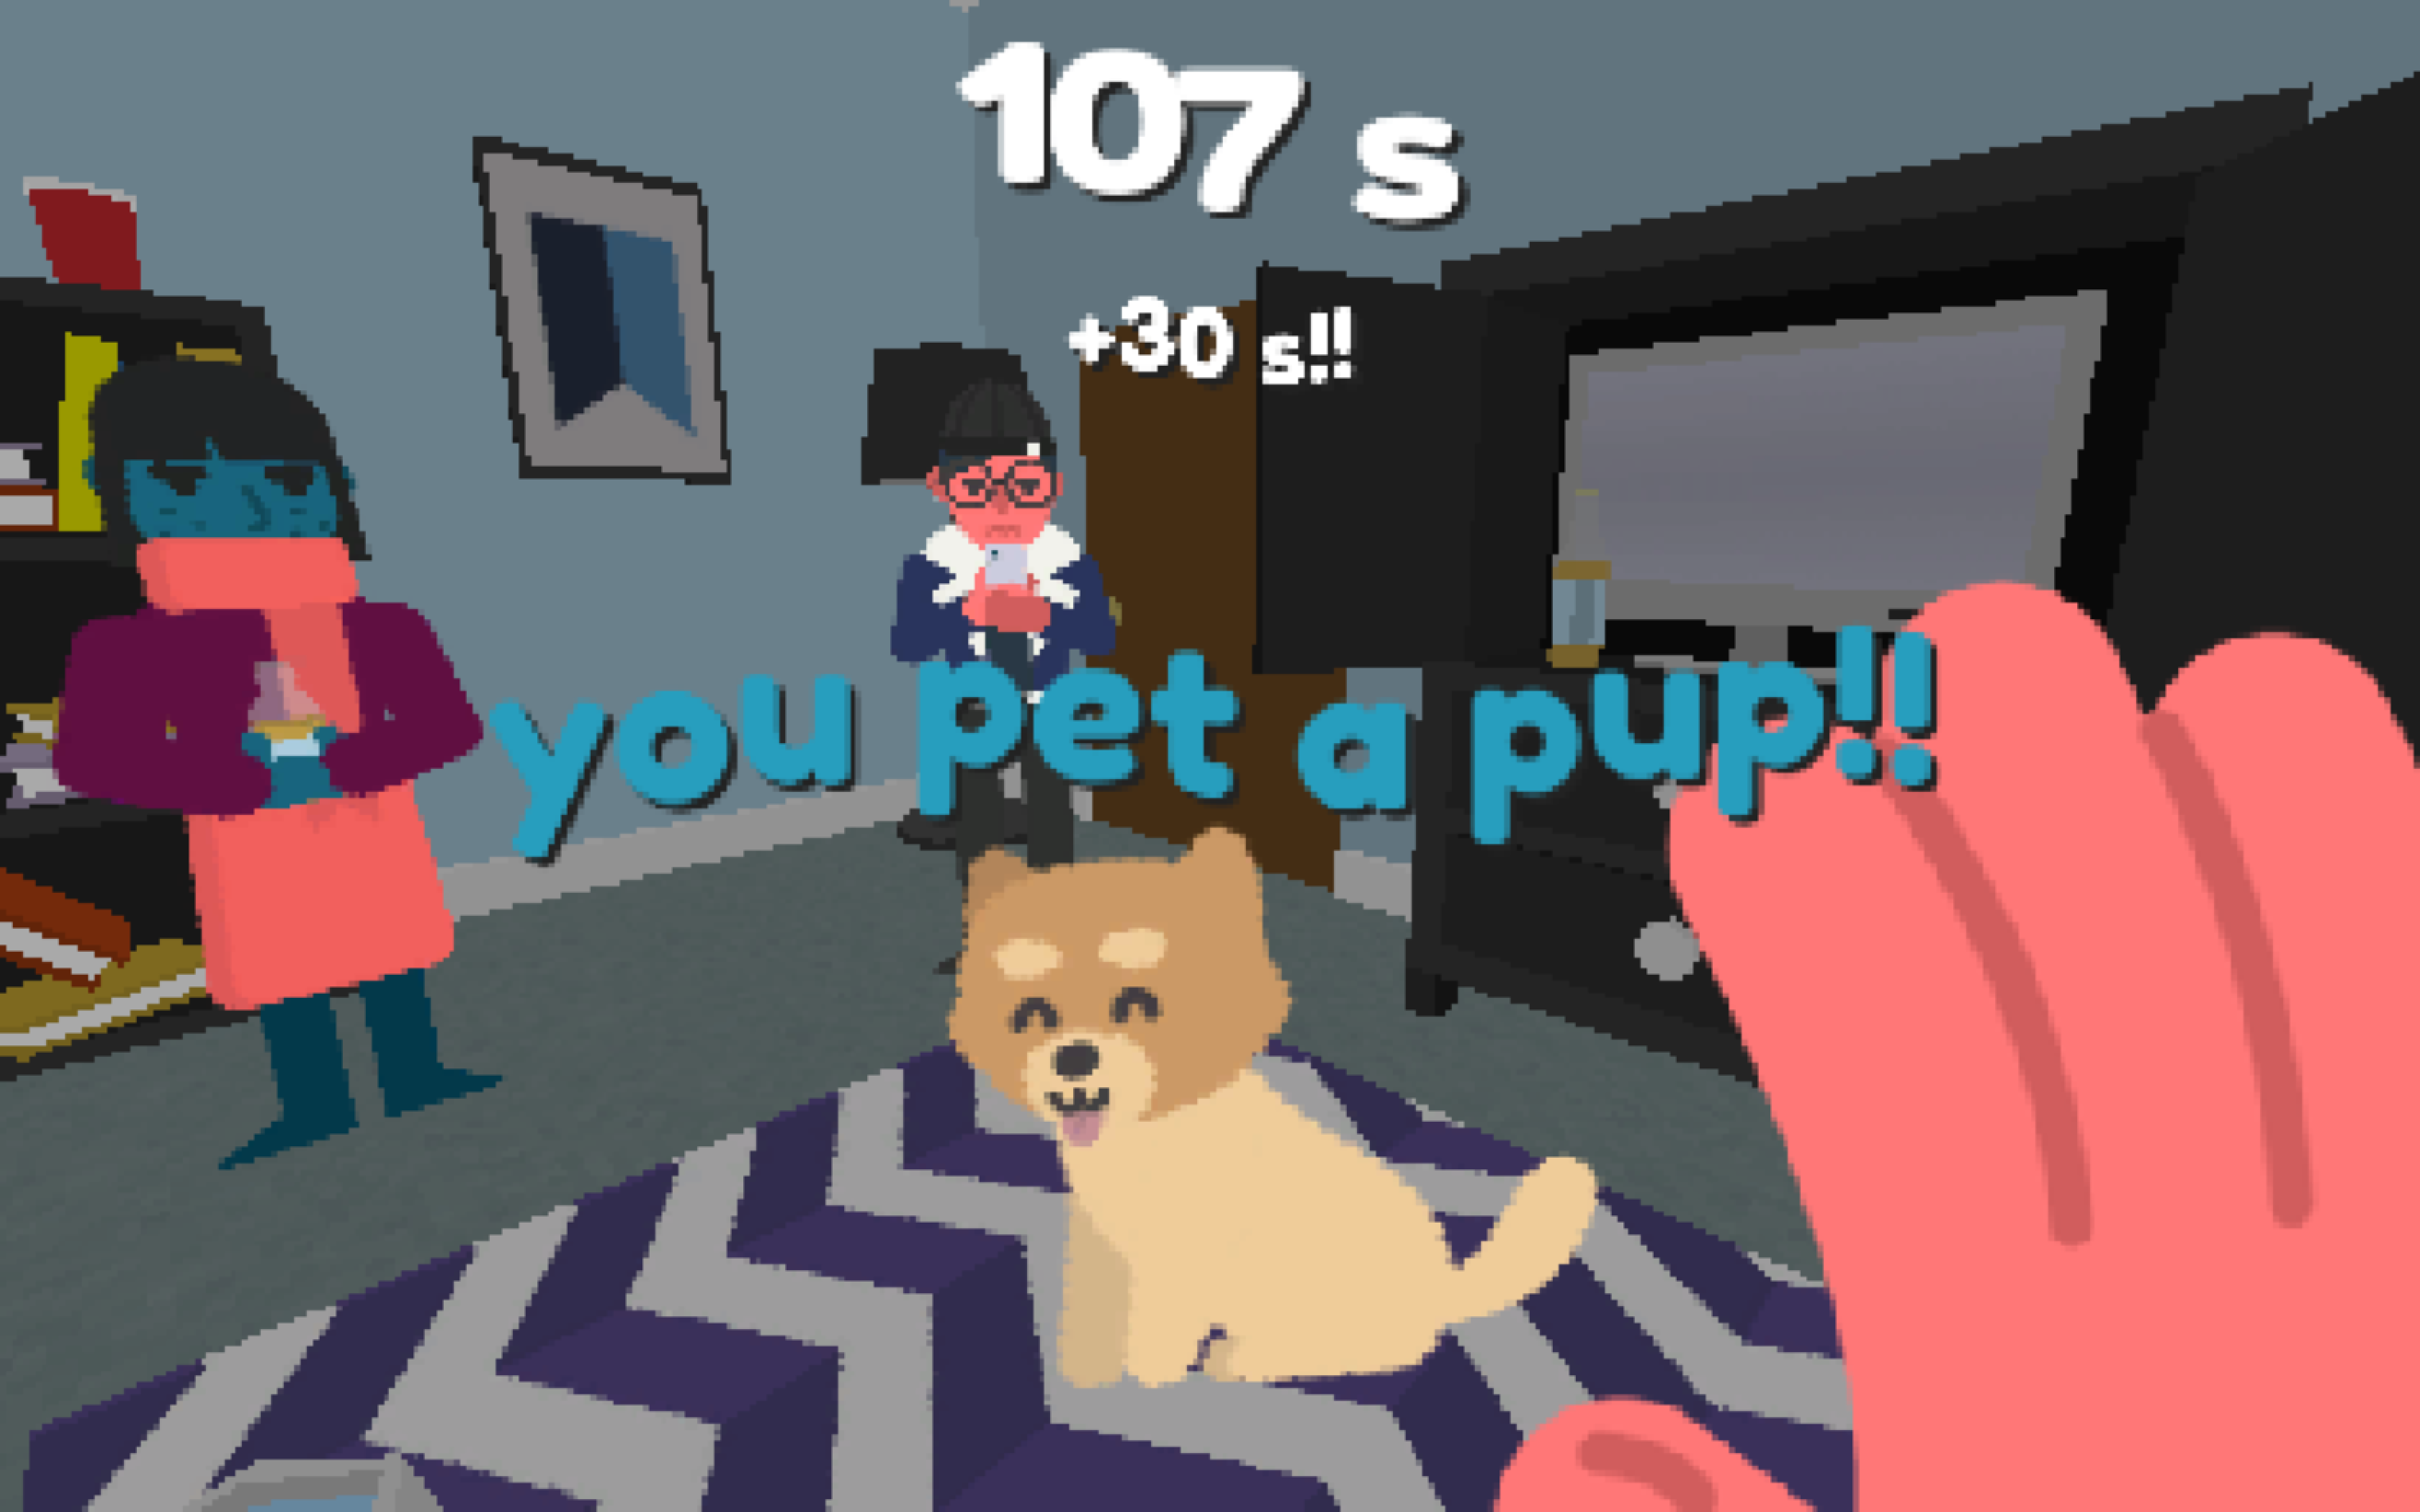 pet the dog - Pet the Pup at the Party